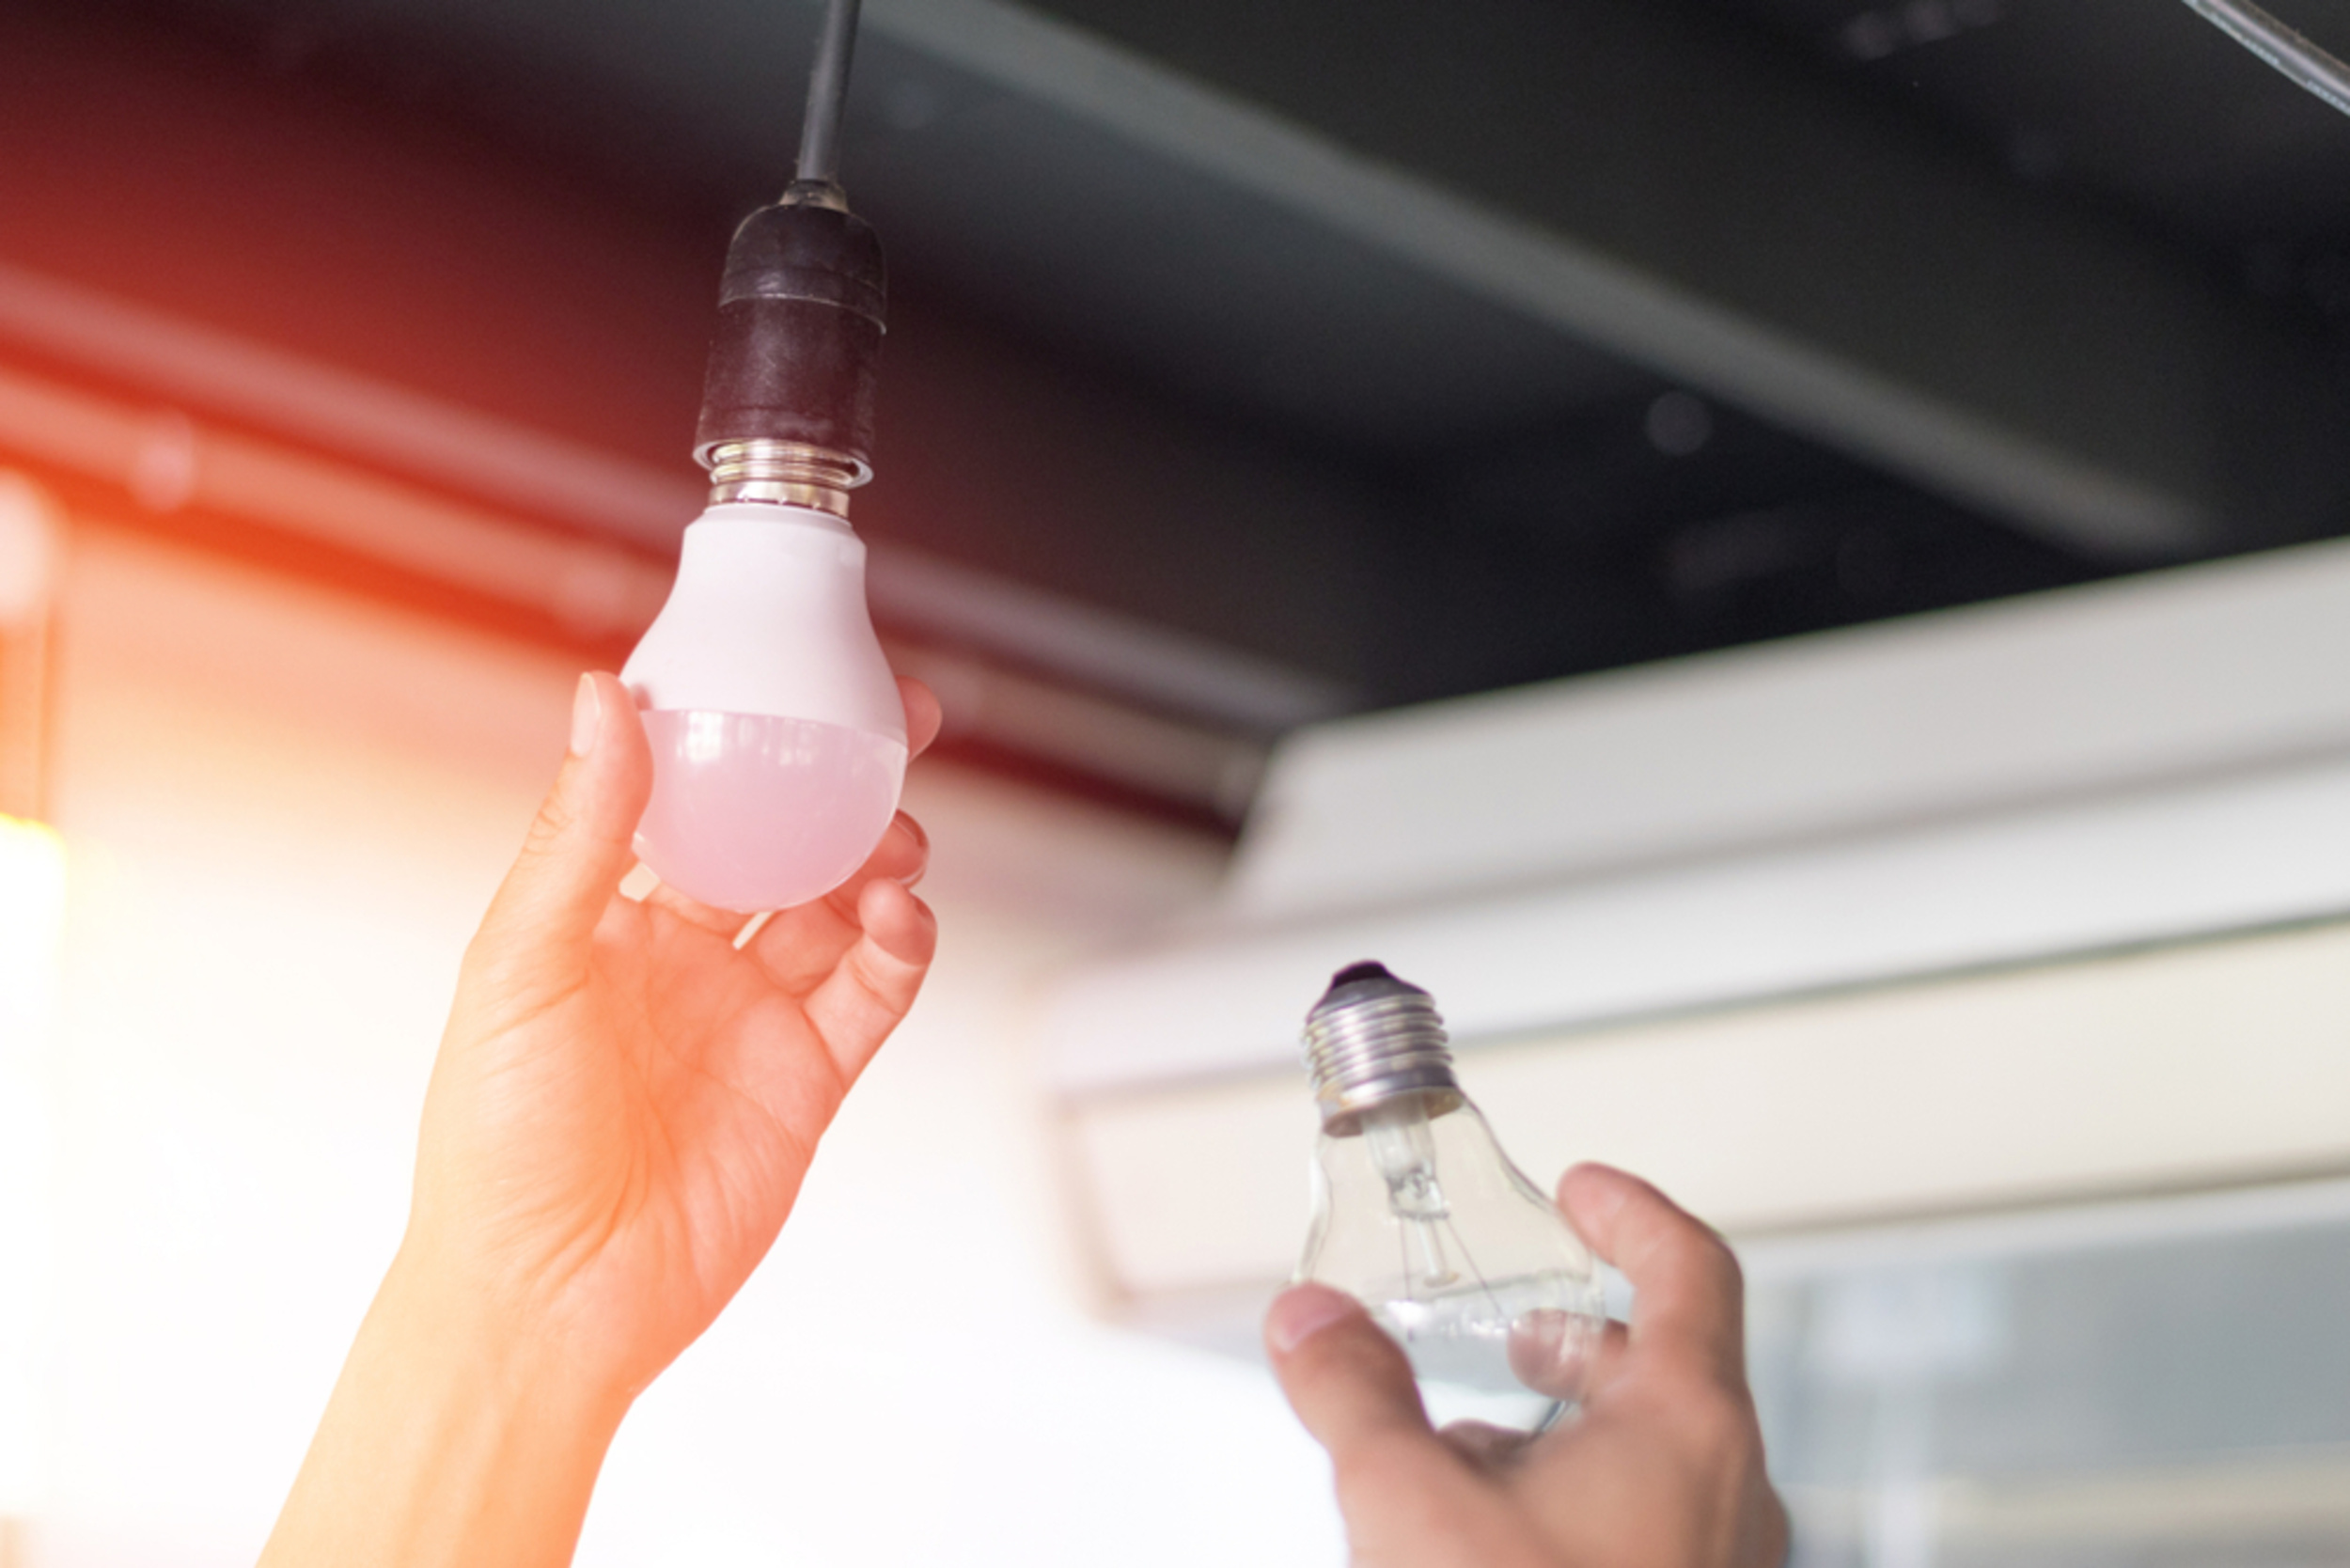 <p>It might sound inconsequential, but traditional incandescent light bulbs can put off a ton of heat, especially in smaller spaces. They're also about to be phased out of the market due to new regulations, so now's a great time to swap to more energy-efficient (and cooler) LED bulbs. </p><p><a href='https://www.msn.com/en-us/community/channel/vid-cj9pqbr0vn9in2b6ddcd8sfgpfq6x6utp44fssrv6mc2gtybw0us'>Follow us on MSN to see more of our exclusive lifestyle content.</a></p>